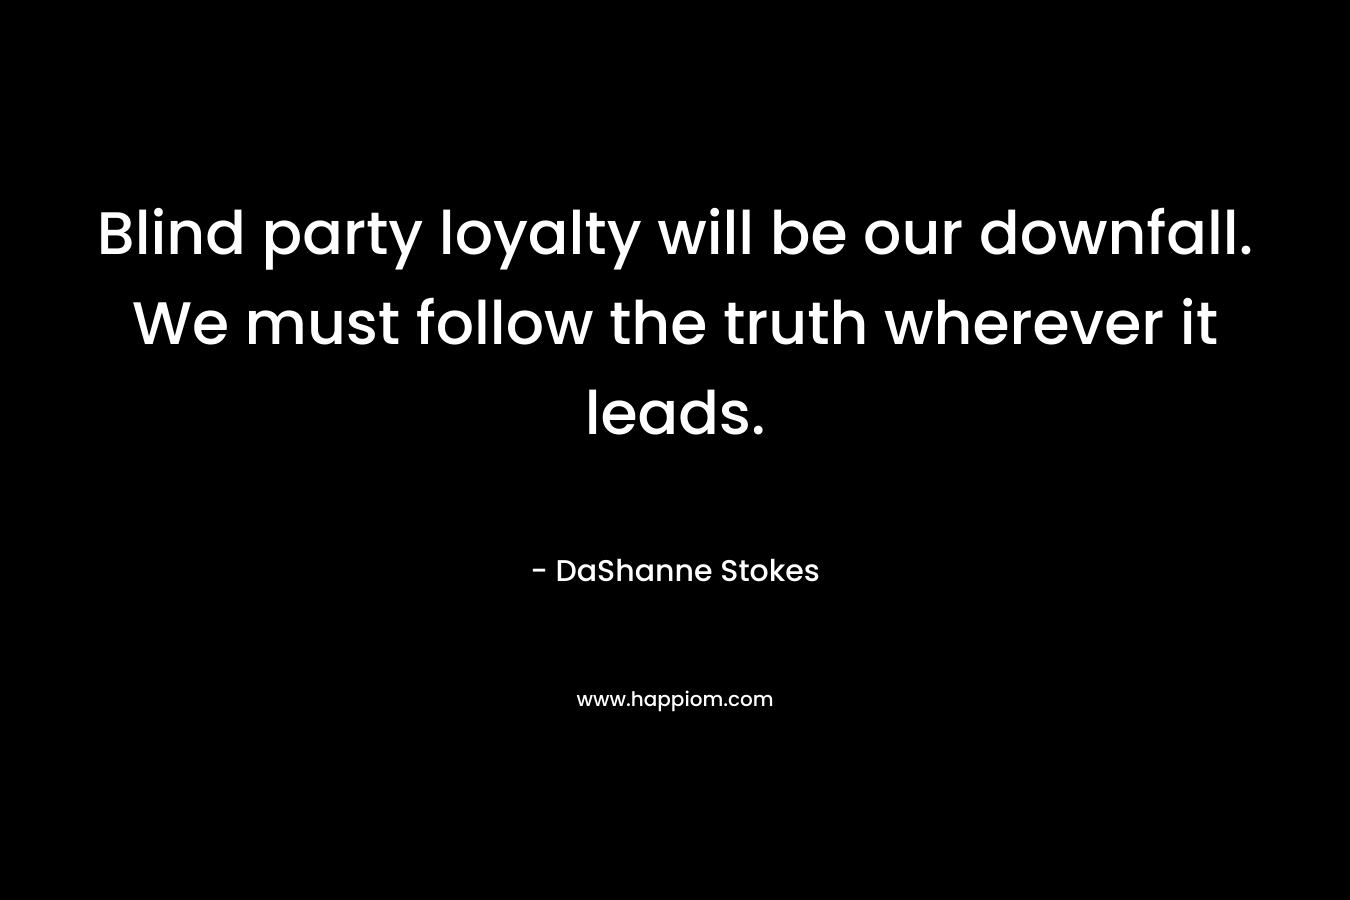 Blind party loyalty will be our downfall. We must follow the truth wherever it leads.